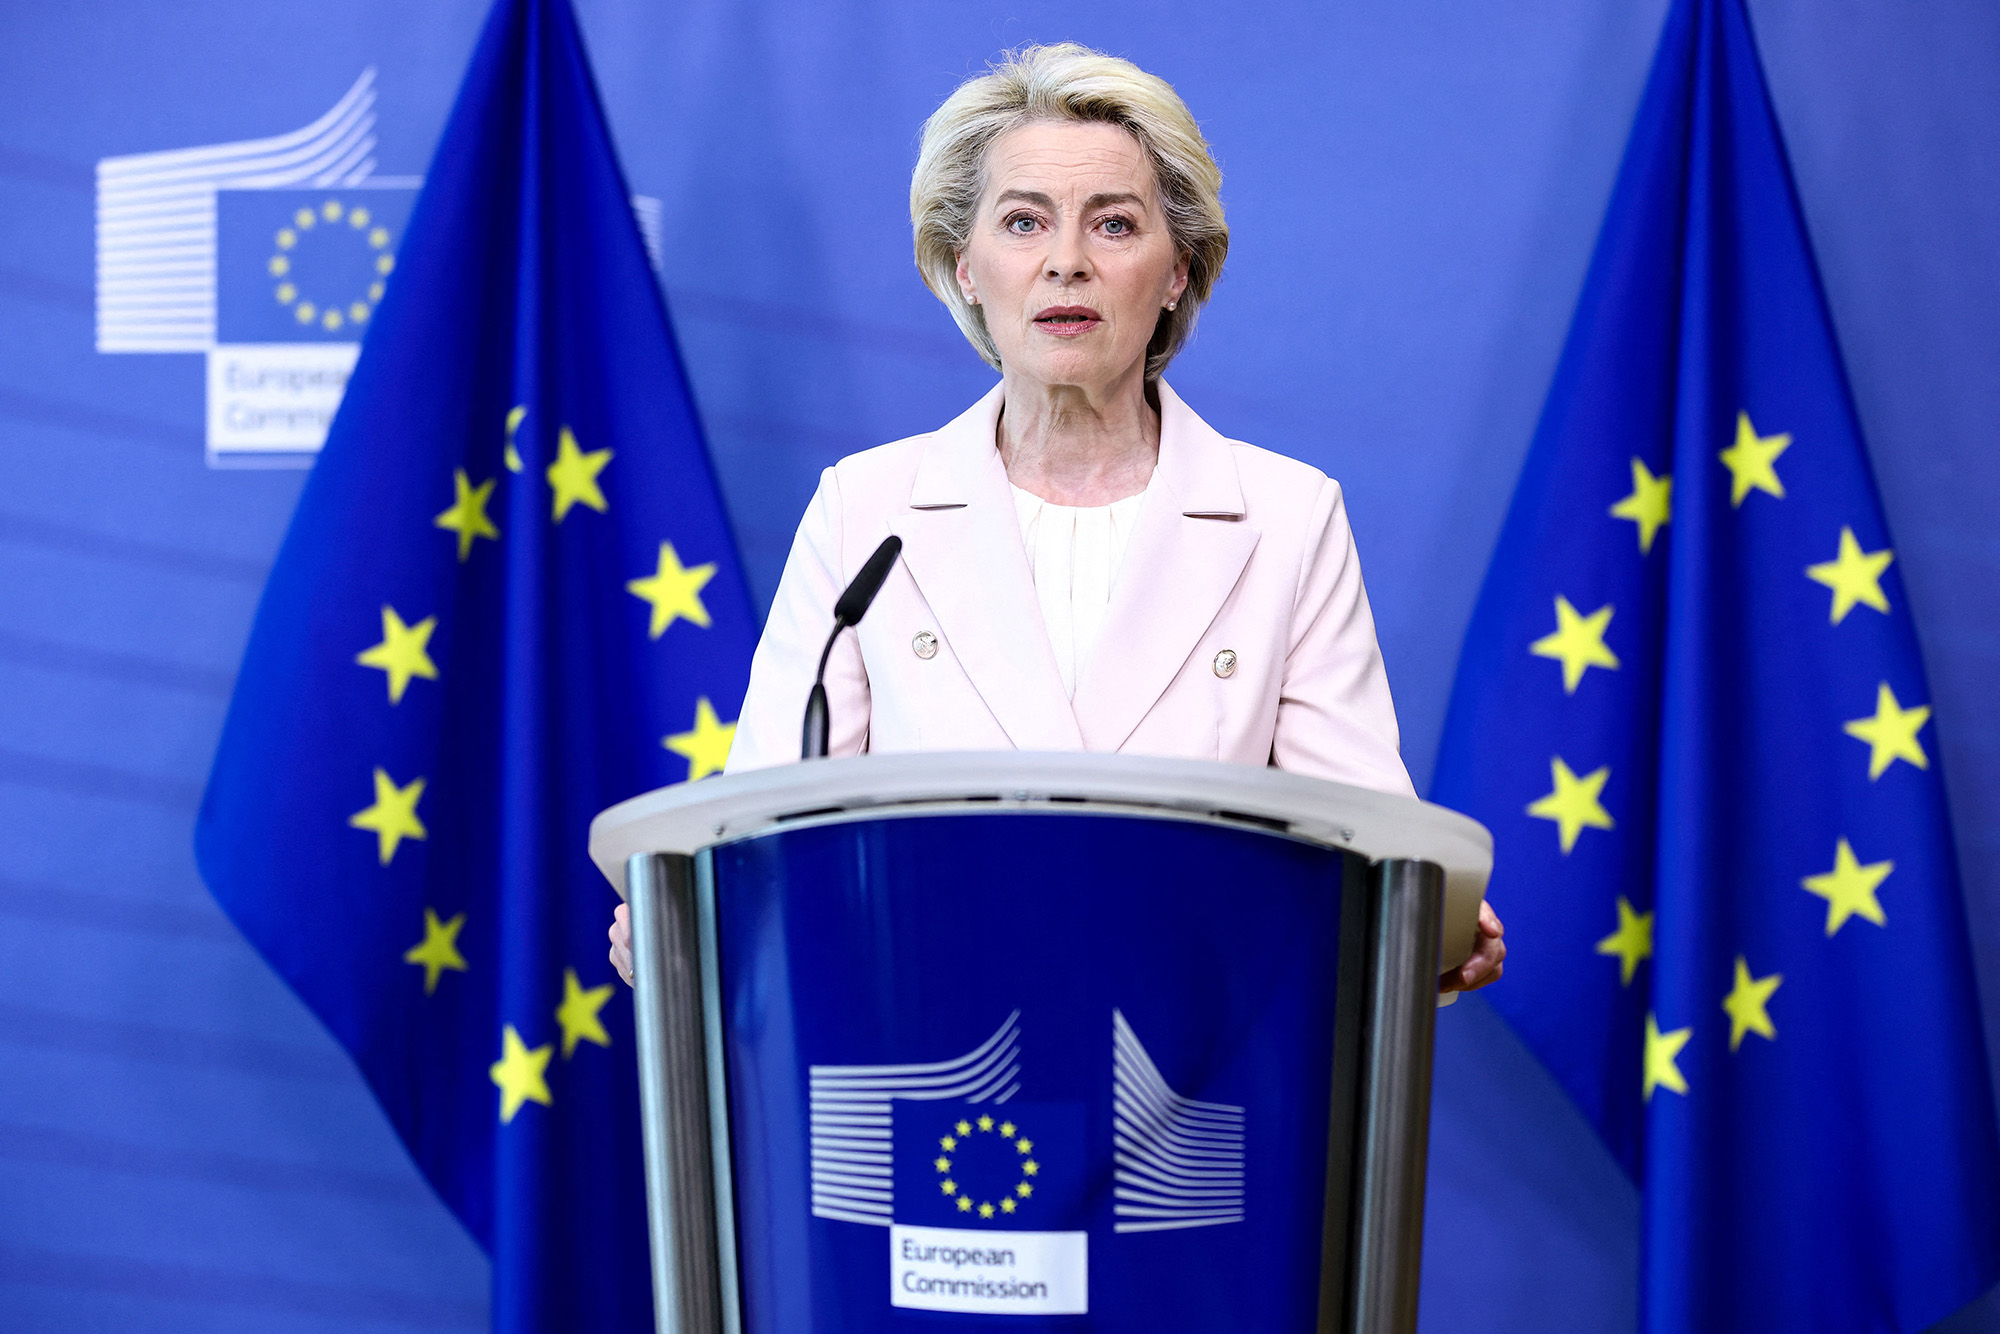 European Commission President Ursula von der Leyen makes a statement in Brussels, Belgium, on April 27, following Russian energy giant Gazprom's decision to halt gas shipments to Poland and Bulgaria.